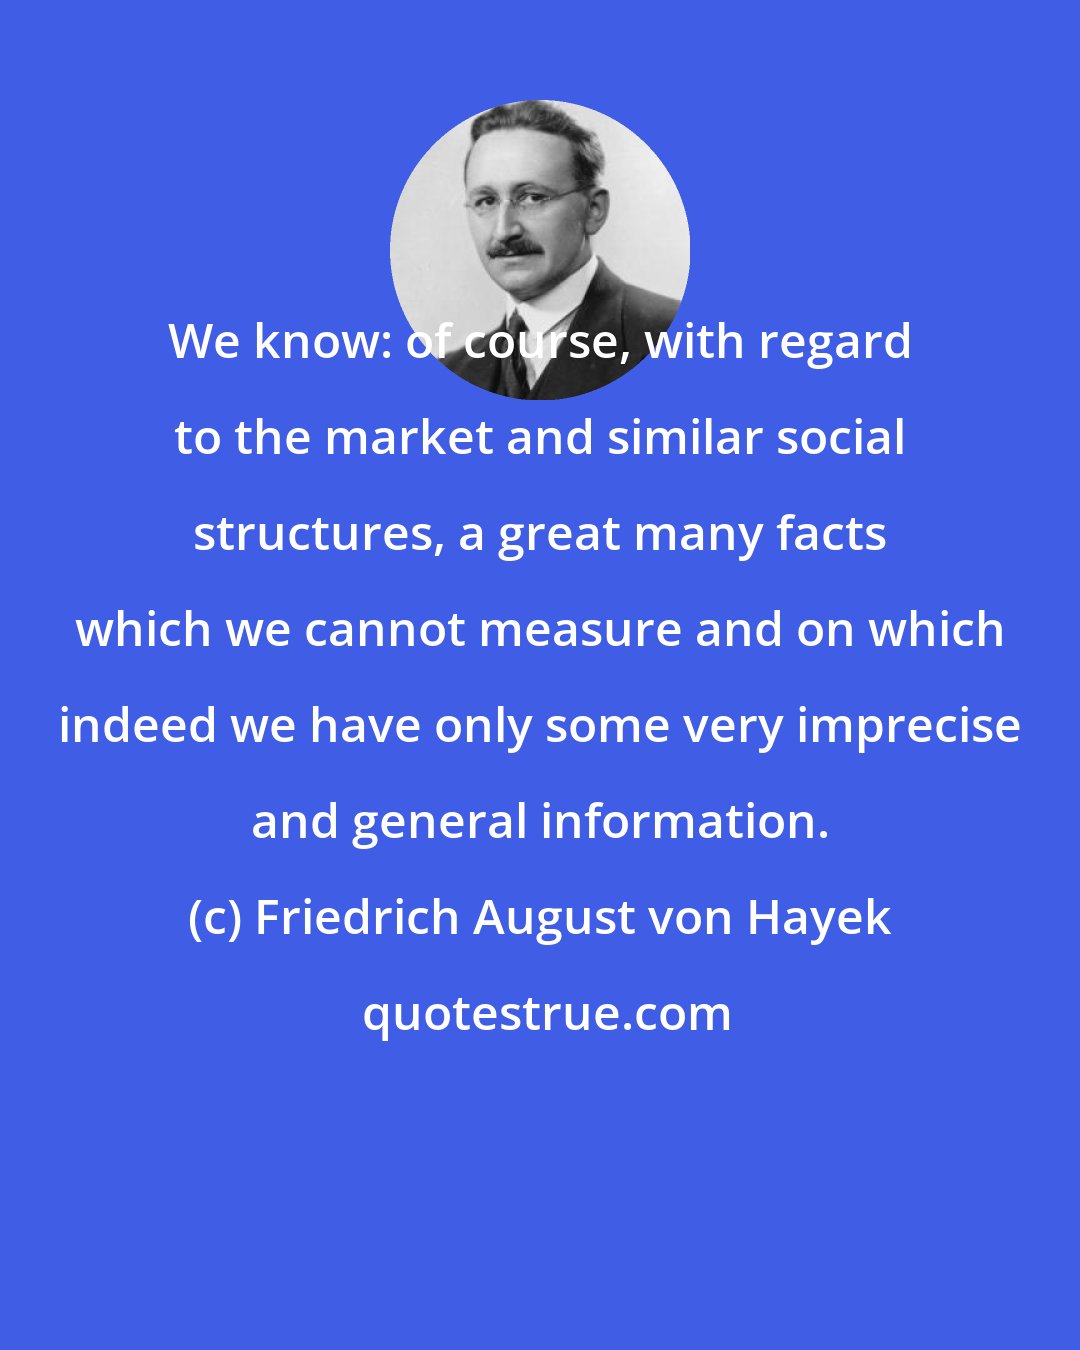 Friedrich August von Hayek: We know: of course, with regard to the market and similar social structures, a great many facts which we cannot measure and on which indeed we have only some very imprecise and general information.